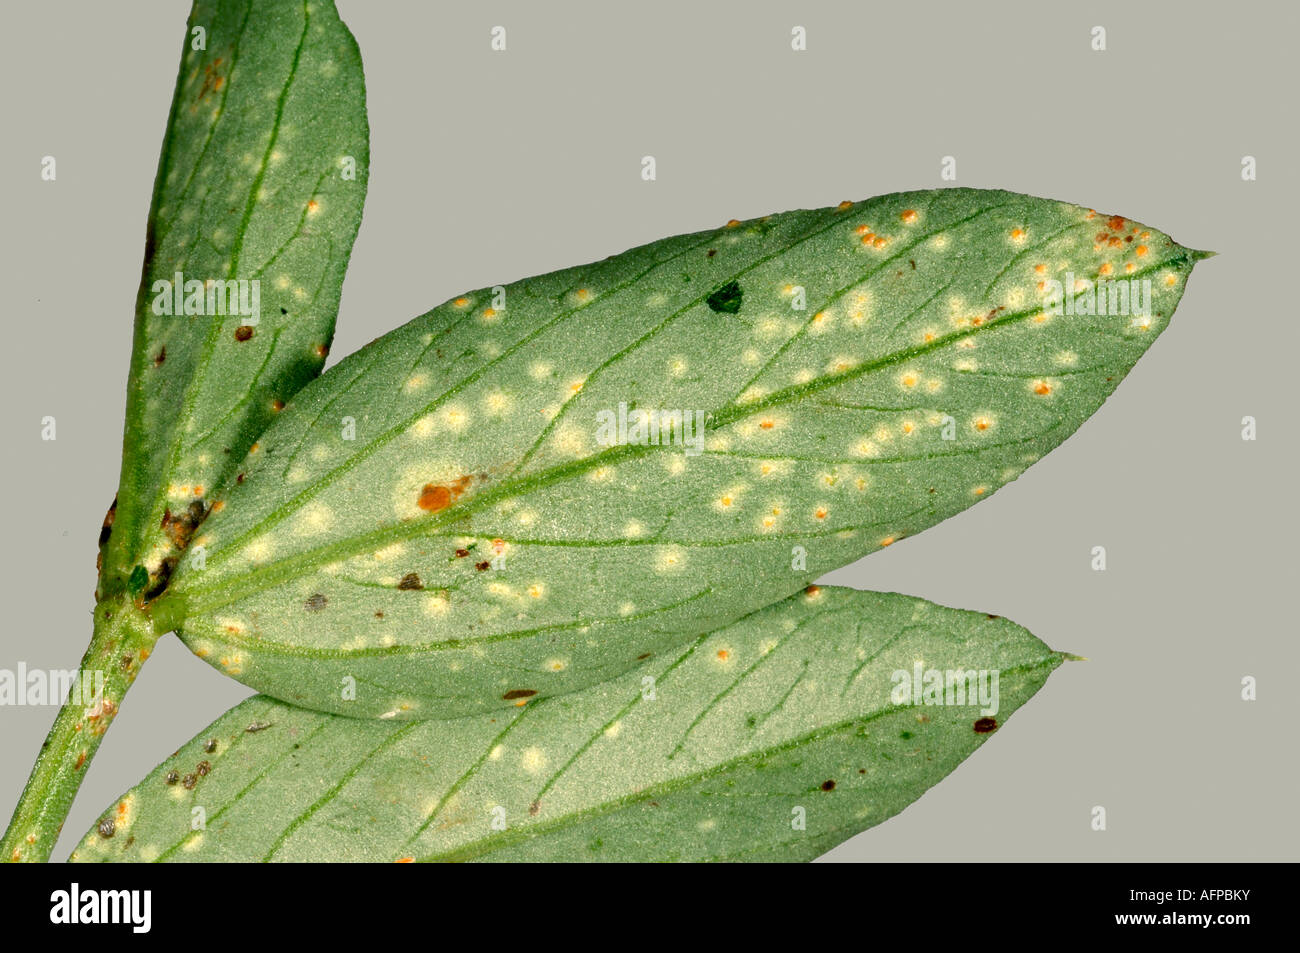 Early infection pustules of broad bean rust Uromyces fabae on broad field bean leaf Vicia faba Stock Photo